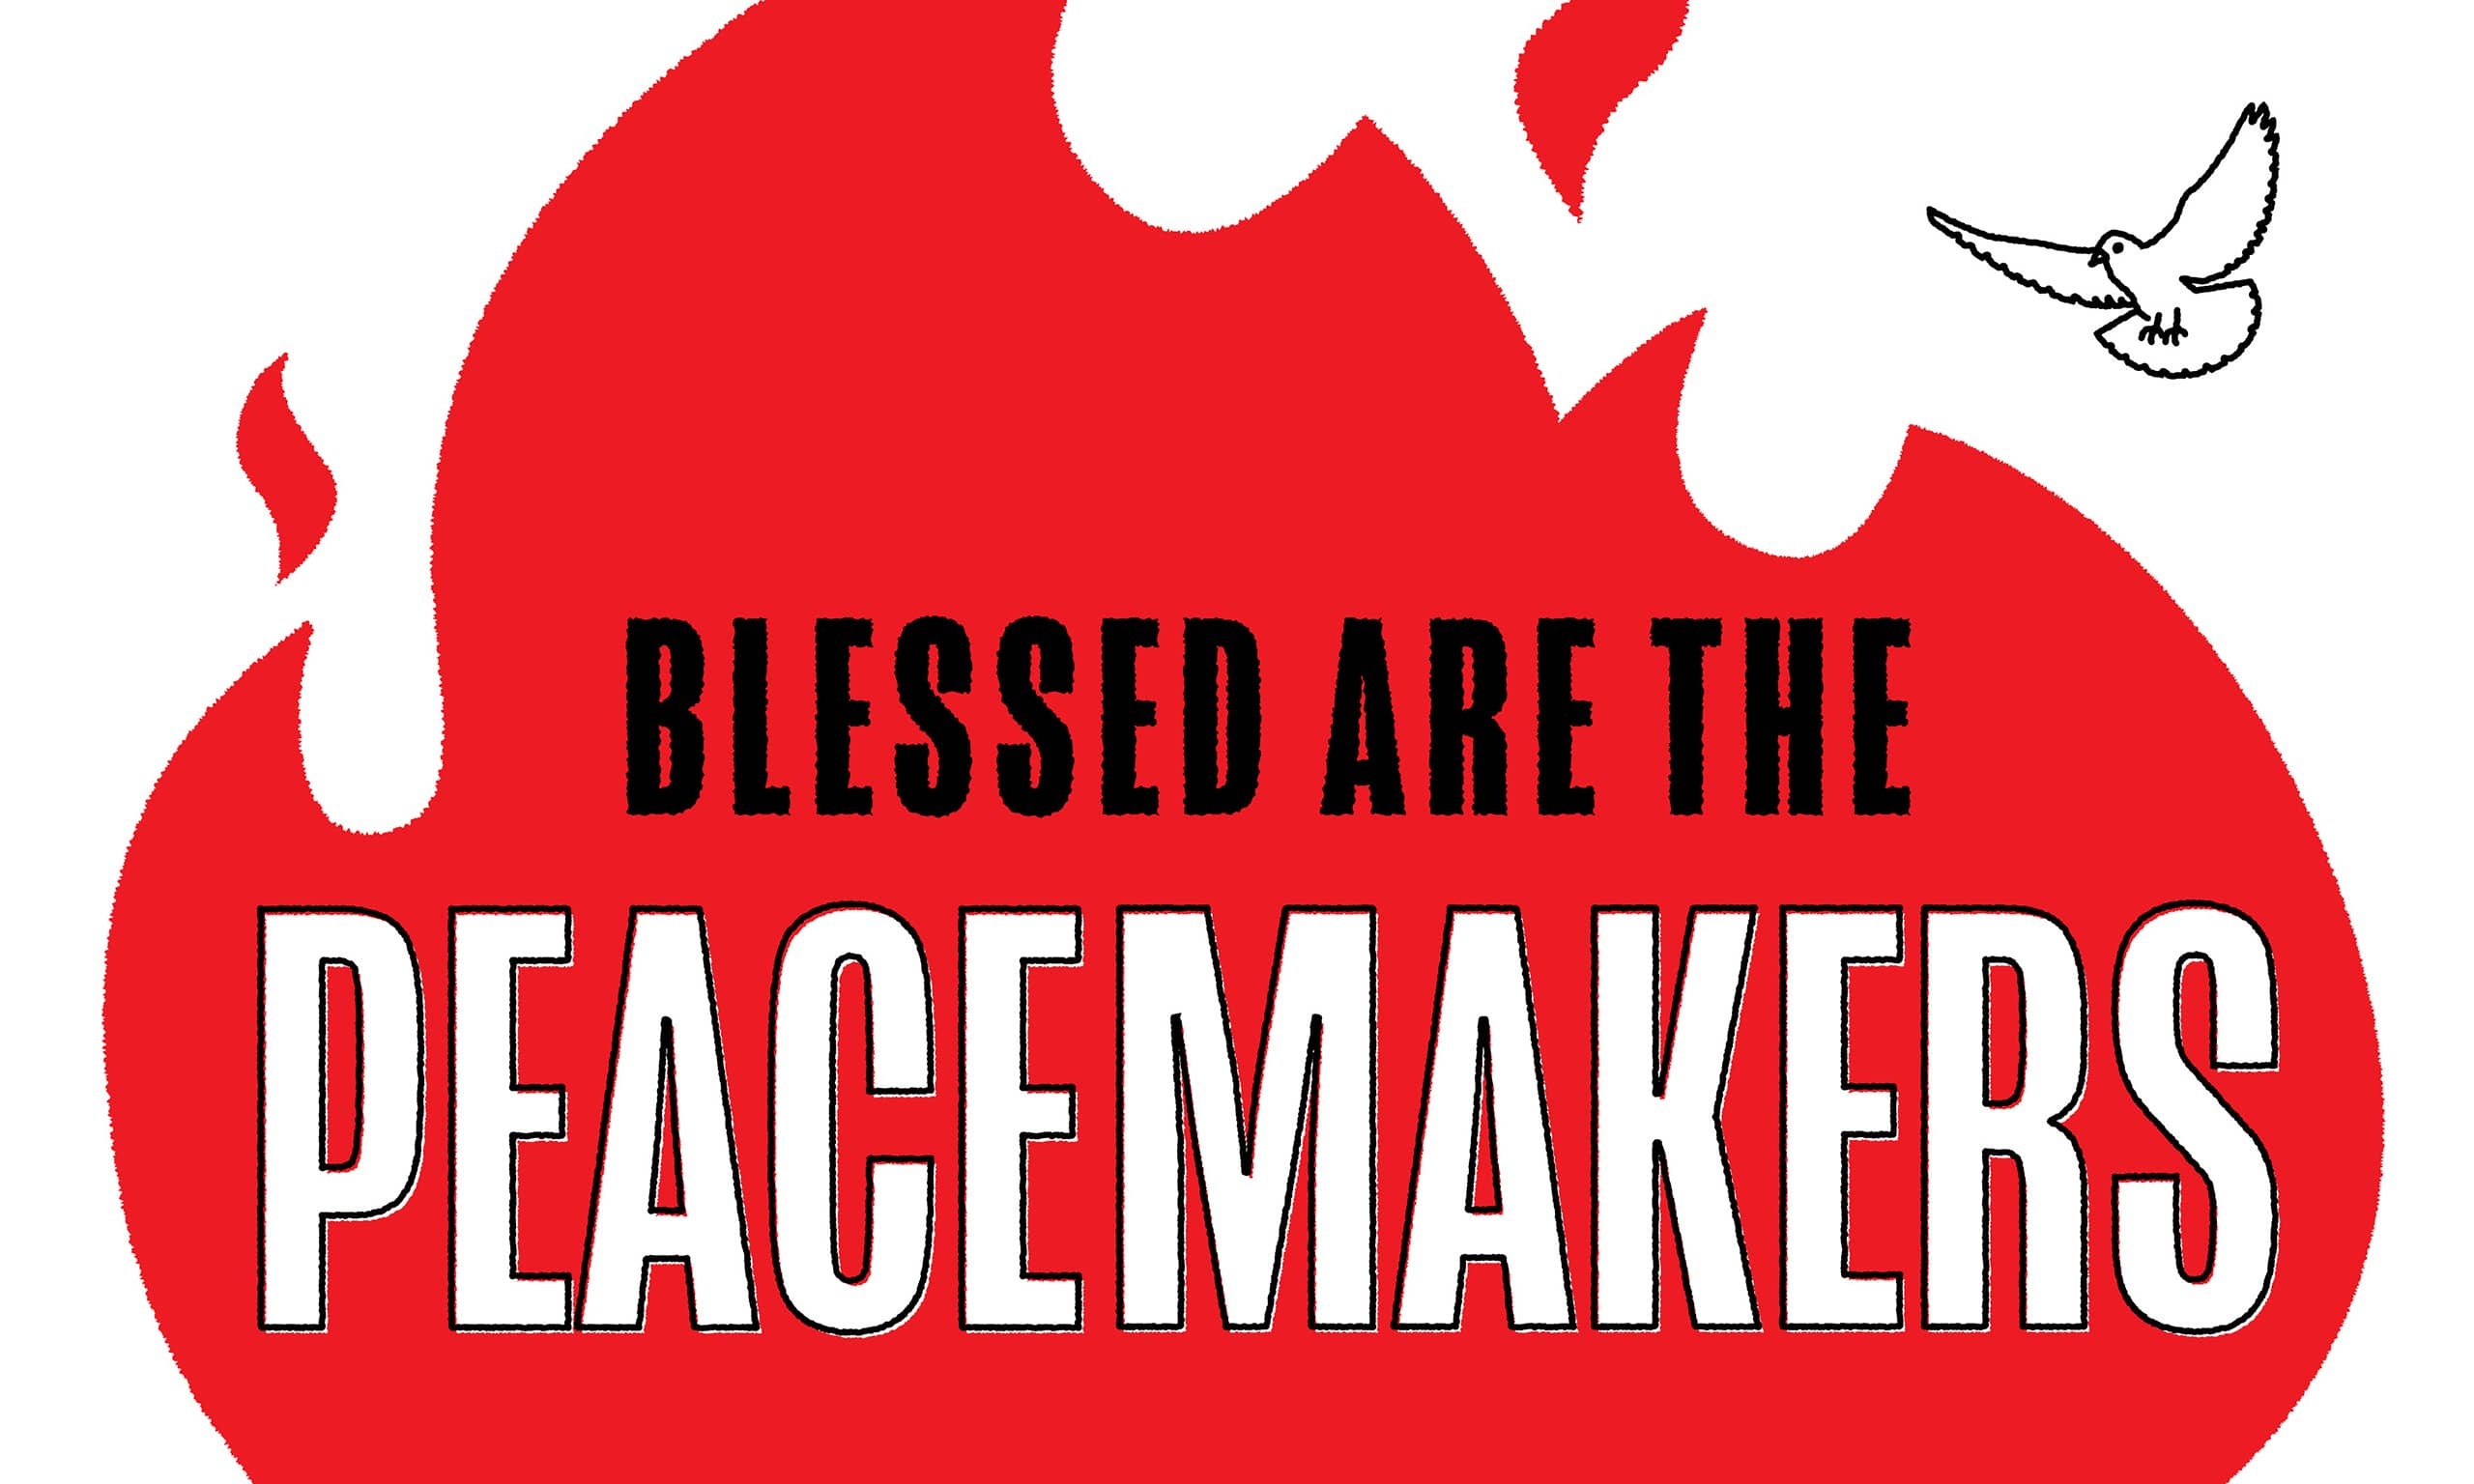 Words "Blessed Are the Peacemakers" over a fire illustration with a white dove flying.